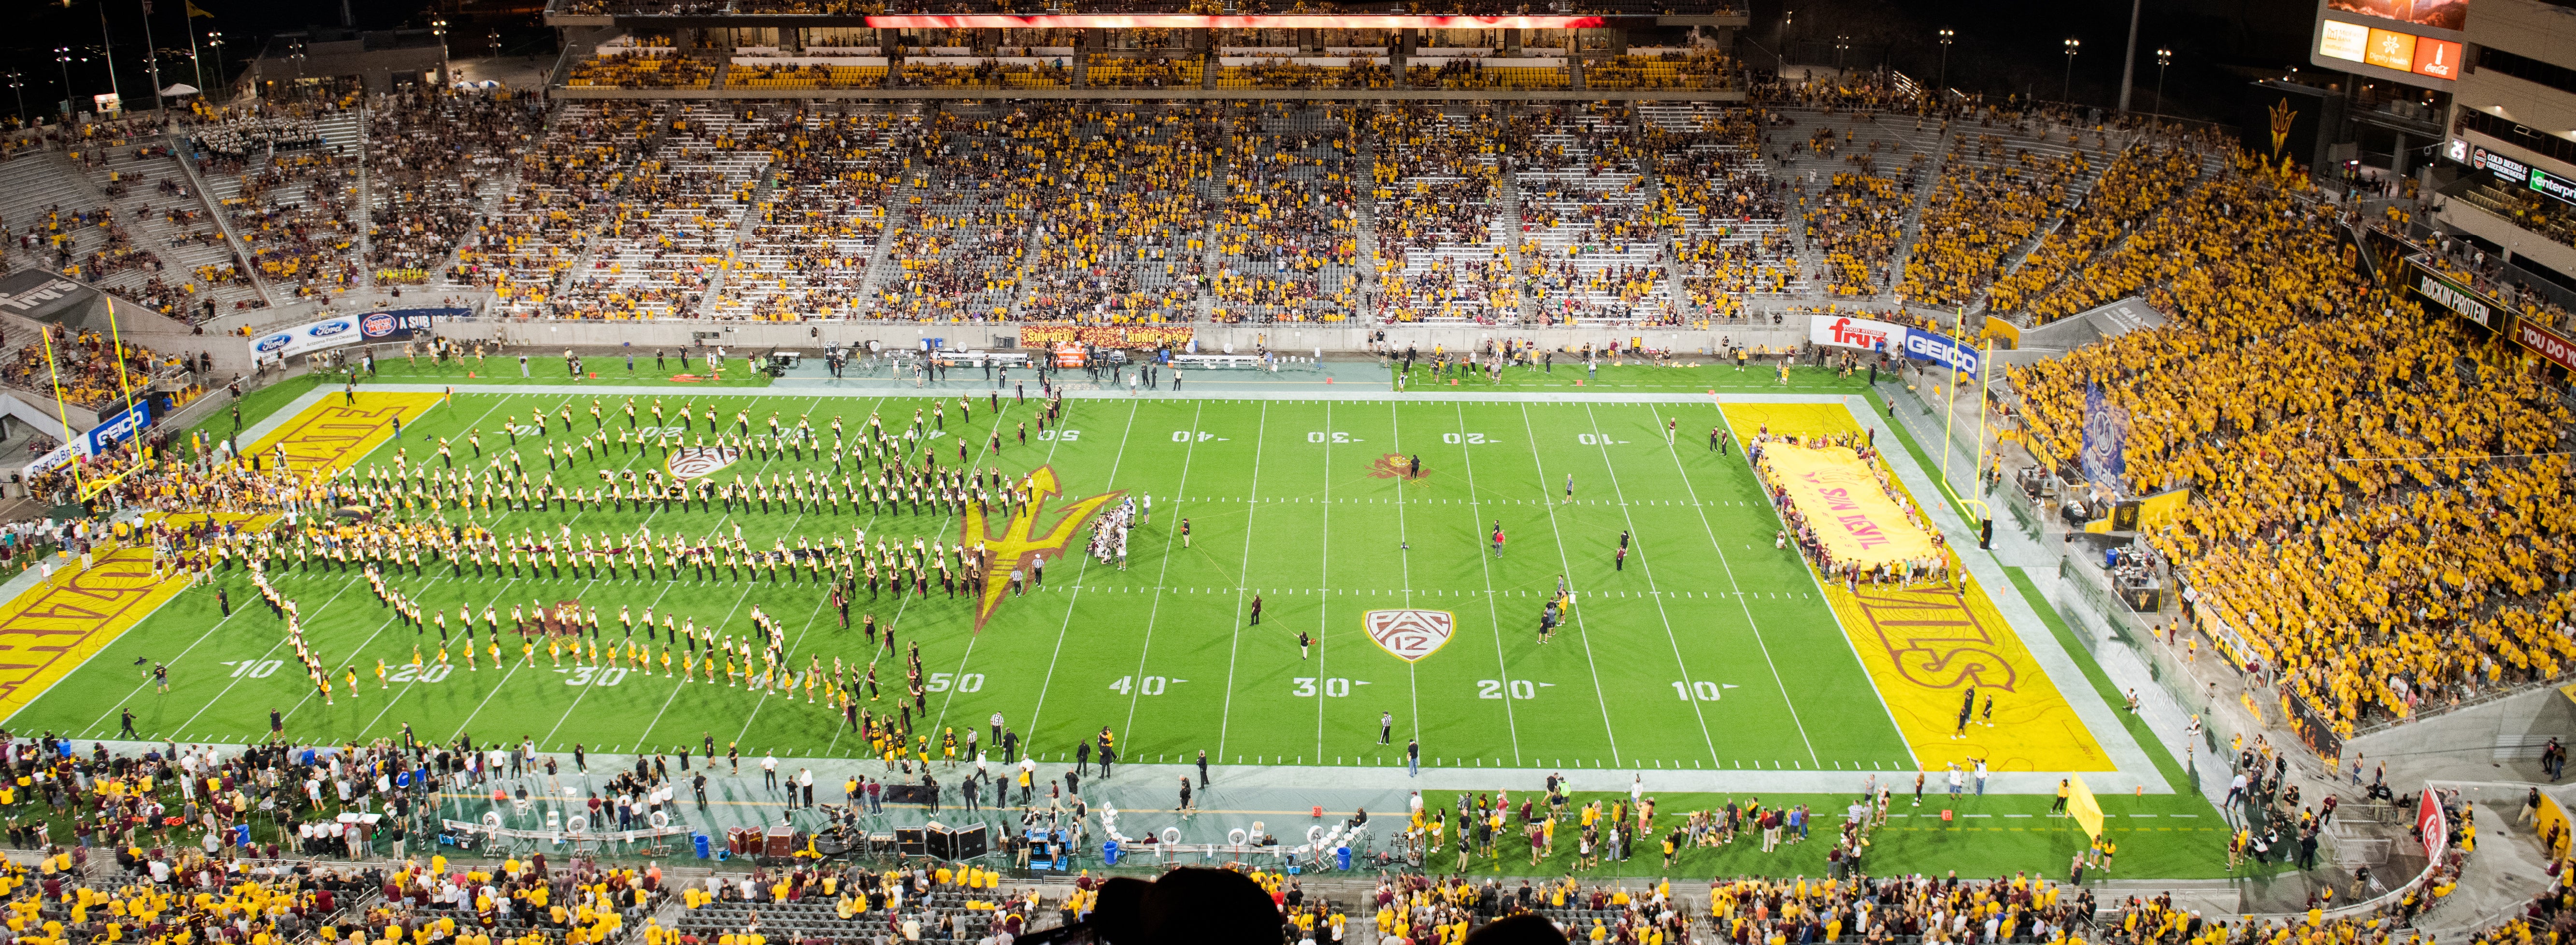 View from stands of ASU's Sun Devil Football Stadium